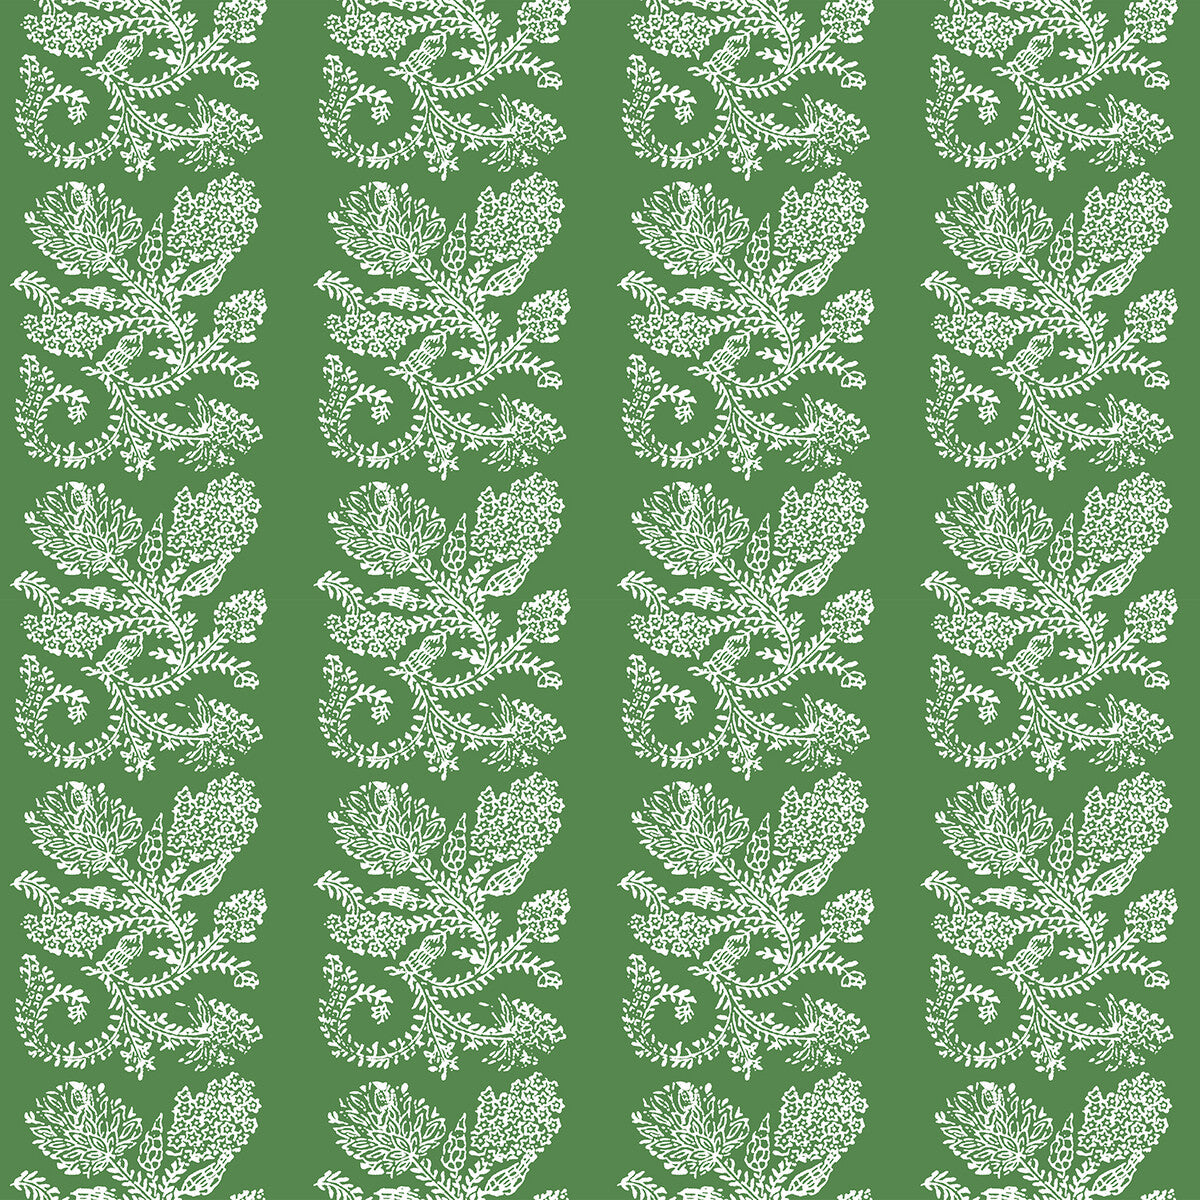 Camino fabric in verde color - pattern LCT1026.001.0 - by Gaston y Daniela in the Lorenzo Castillo V collection